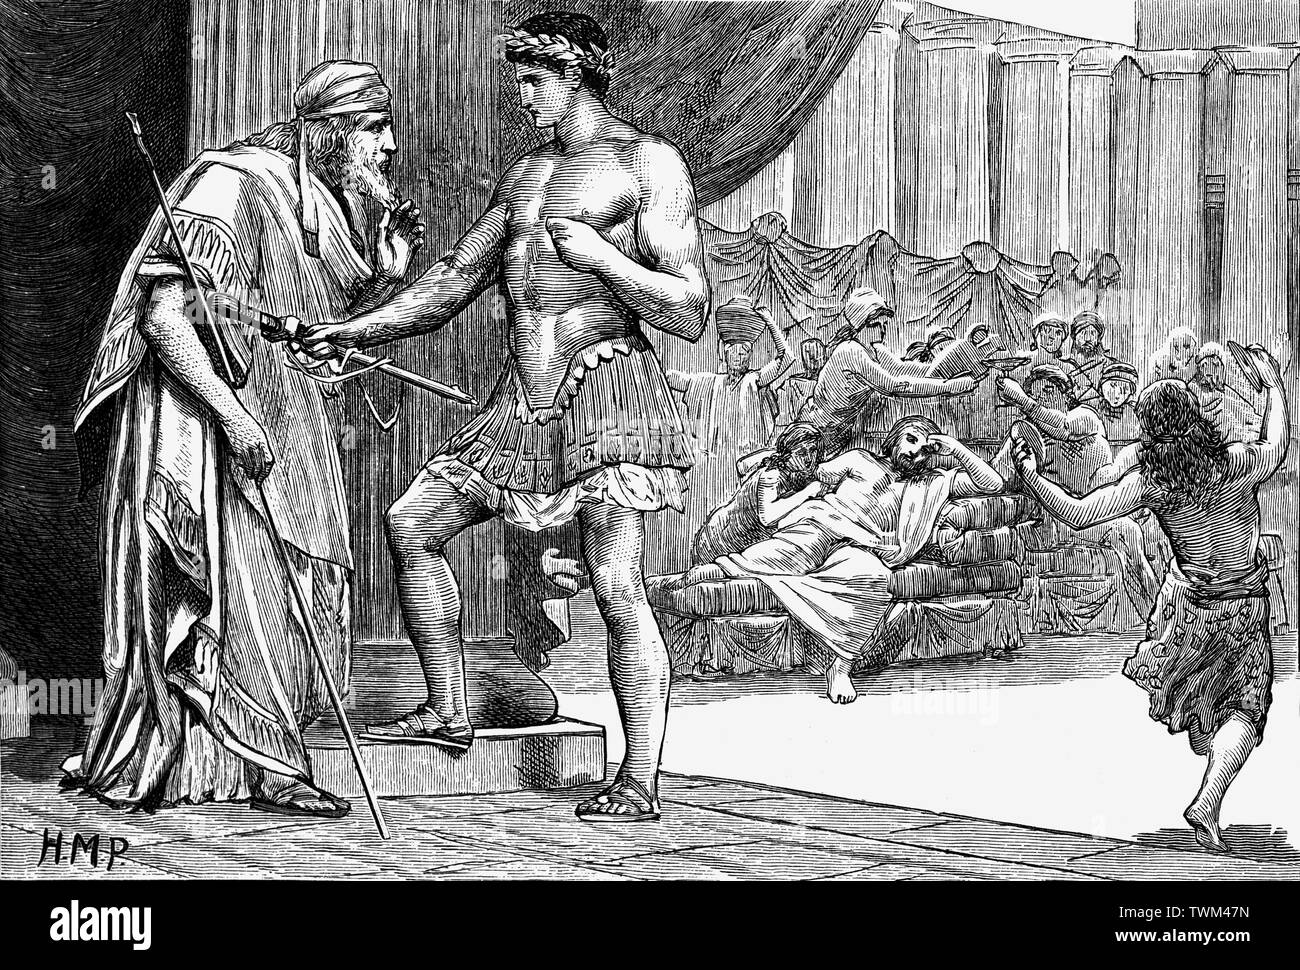 In Greek mythology, Aegeus was an archaic figure in the founding myth of Athens, who gave his name to the Aegean Sea and fathered Theseus, the mythical king and founder-hero of Athens. Theseus was raised on the island of Sphairia. When Theseus grew up and became a brave young man, his mother then told him his father's identity and he took the swords back to king Aegeus to claim his birthright. Stock Photo